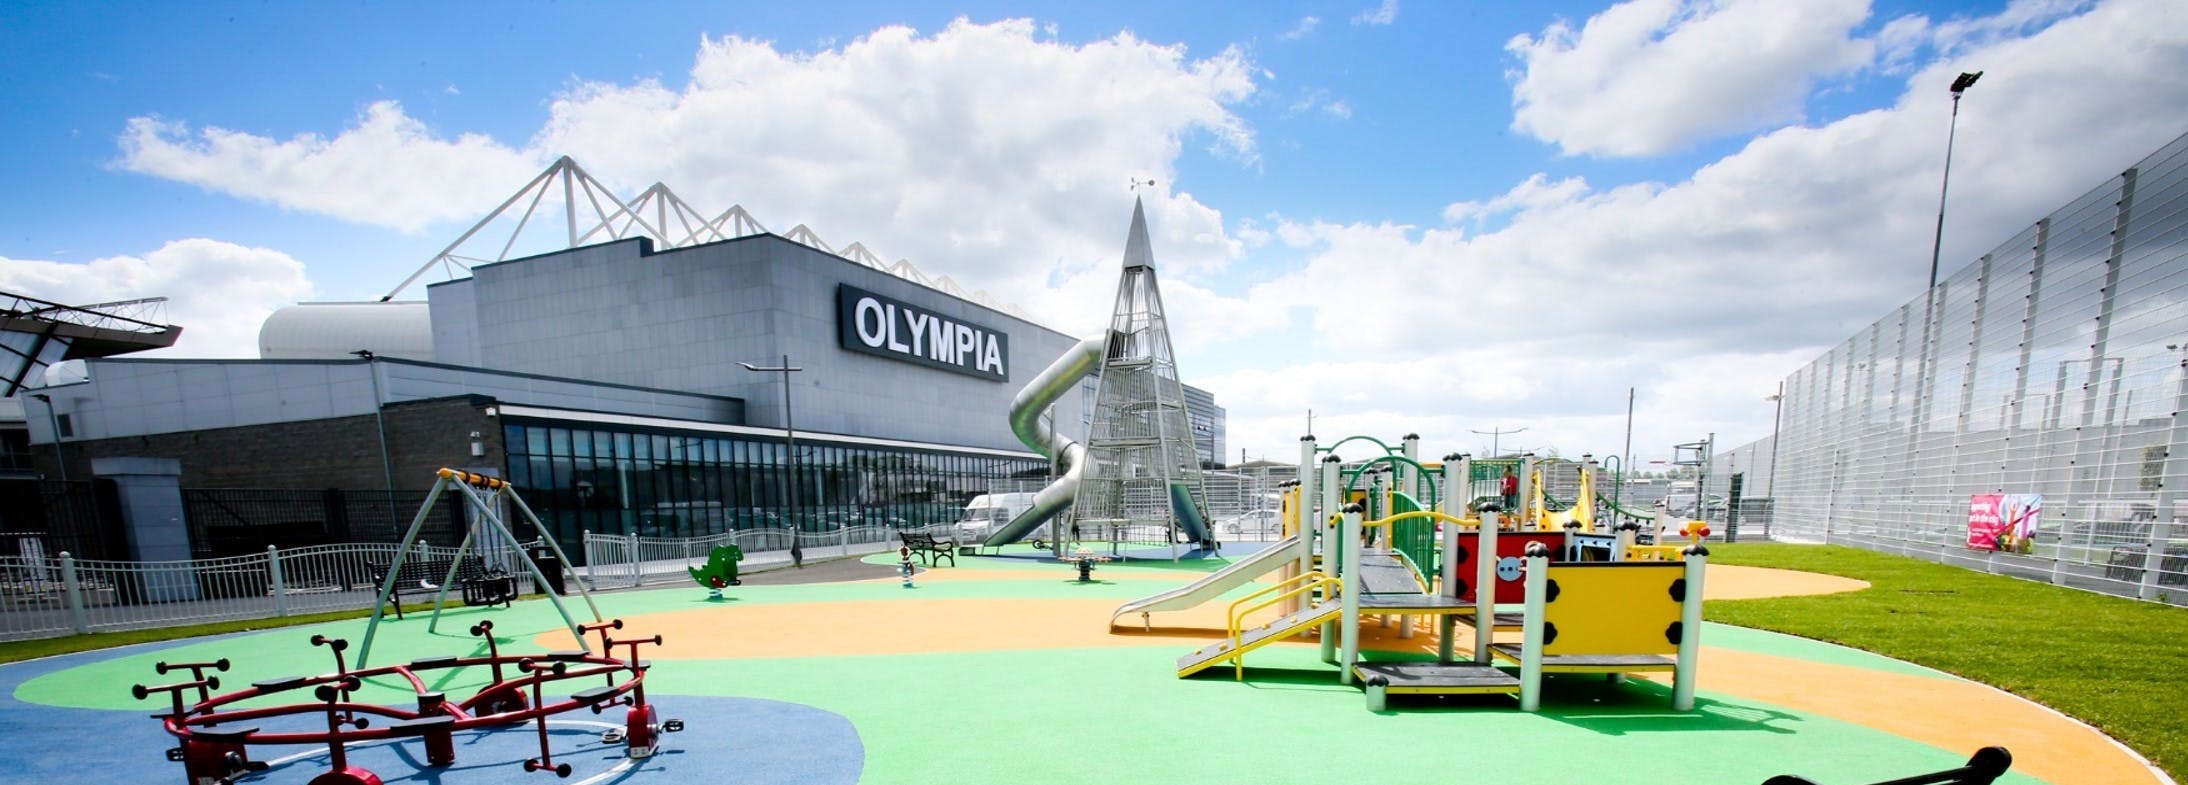 Photo of Olympia Leisure Centre with children's playground